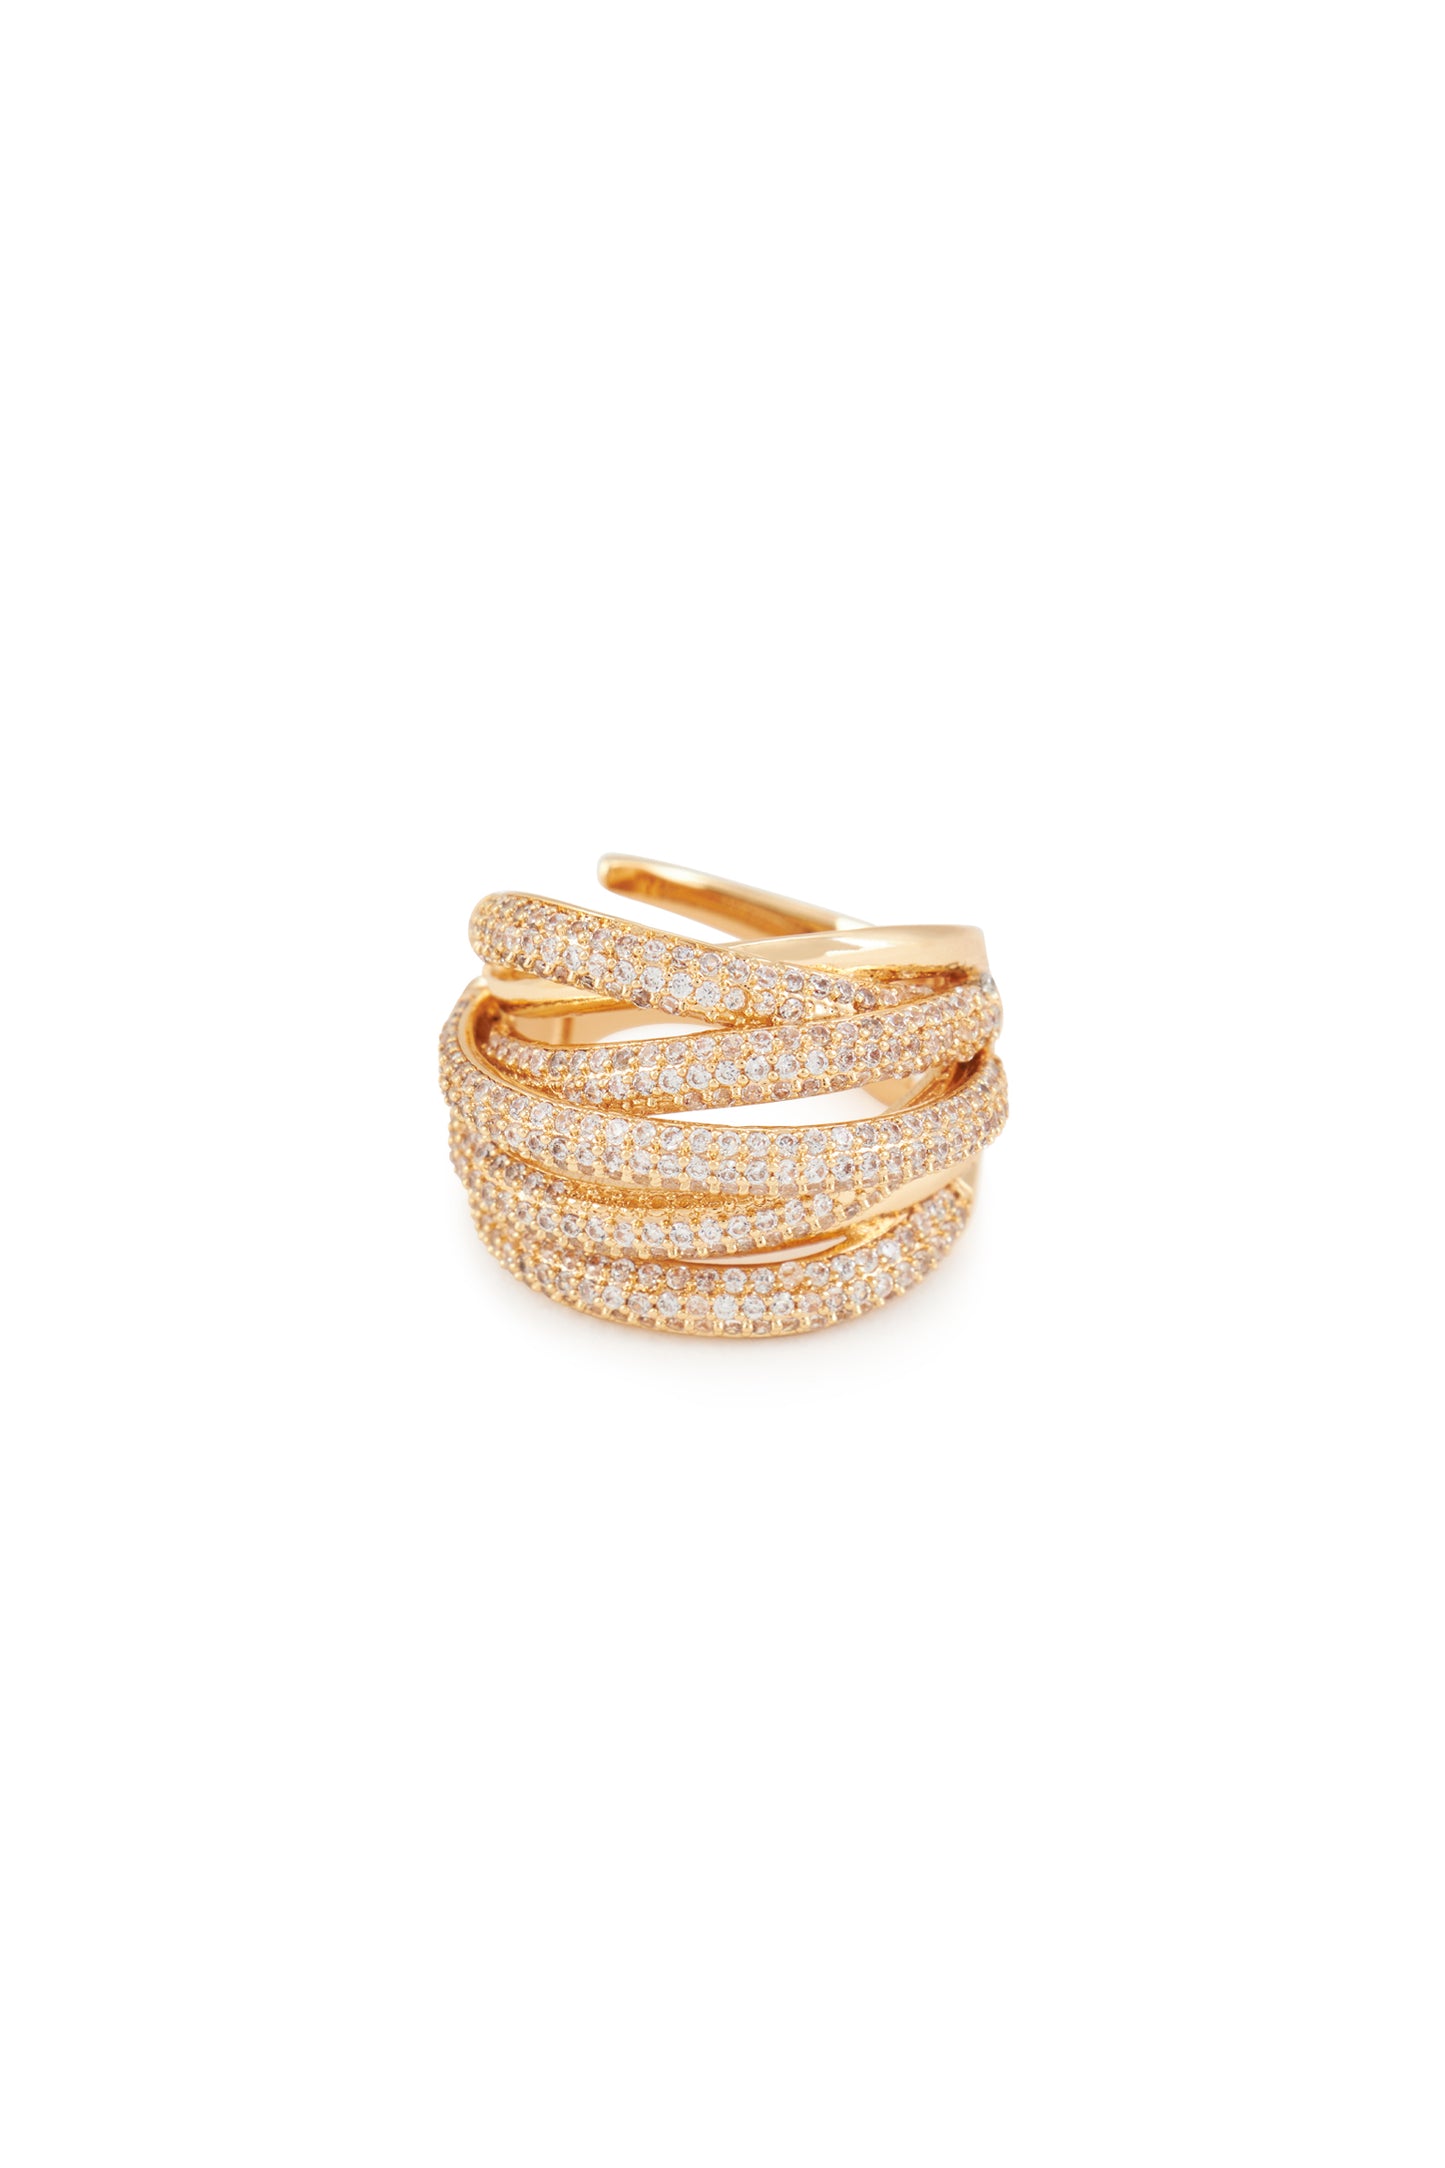 MELUSINA BIJOUX Small Gold Braided Wire Ring